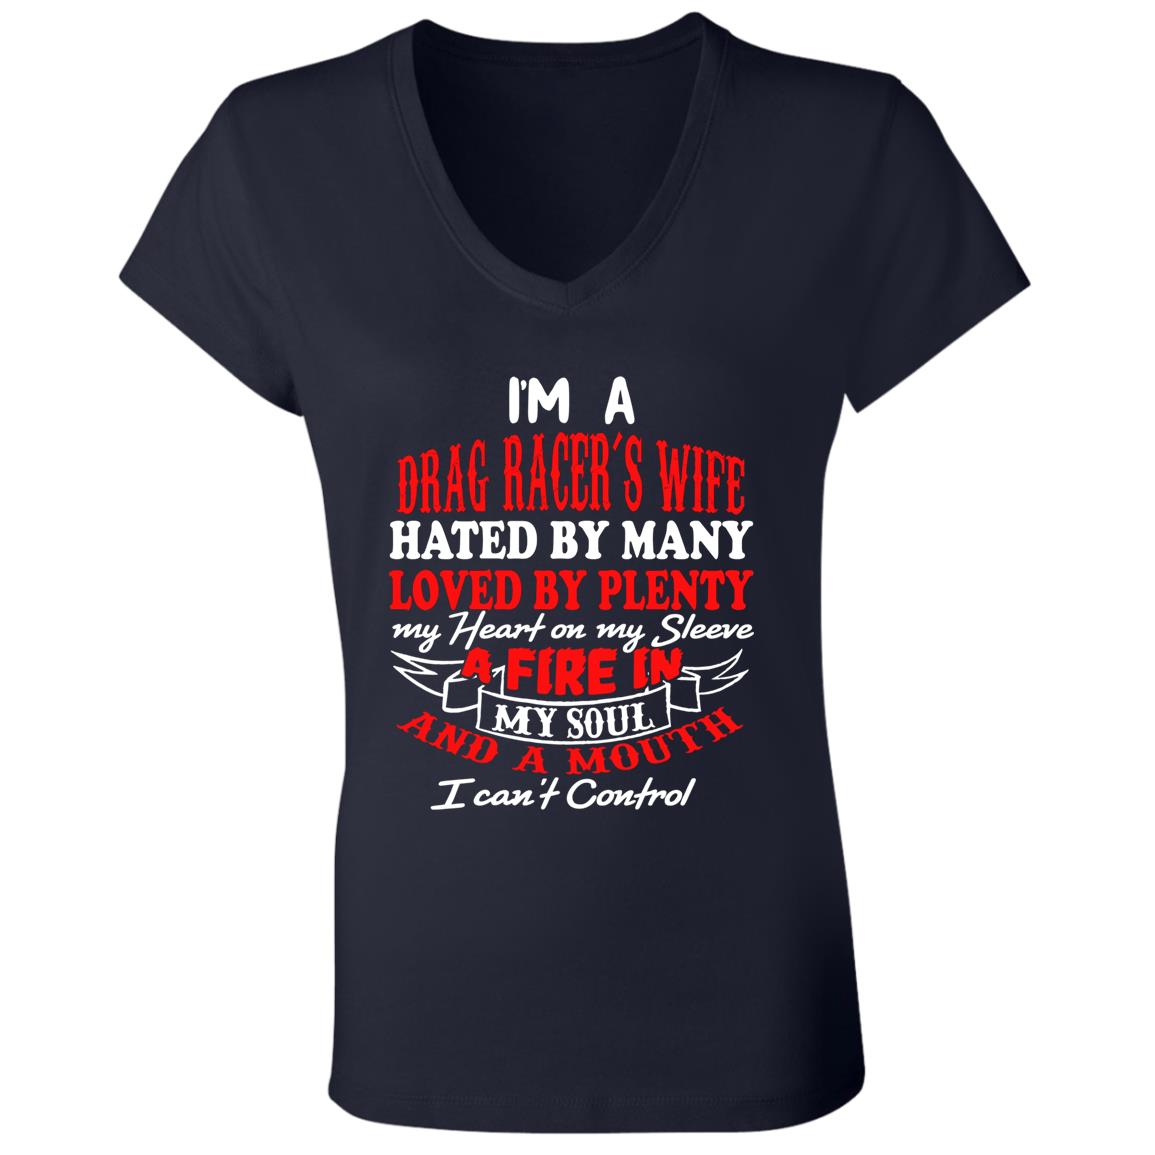 I'm A Drag Racer's Wife Hated By Many Loved By Plenty Ladies' Jersey V-Neck T-Shirt